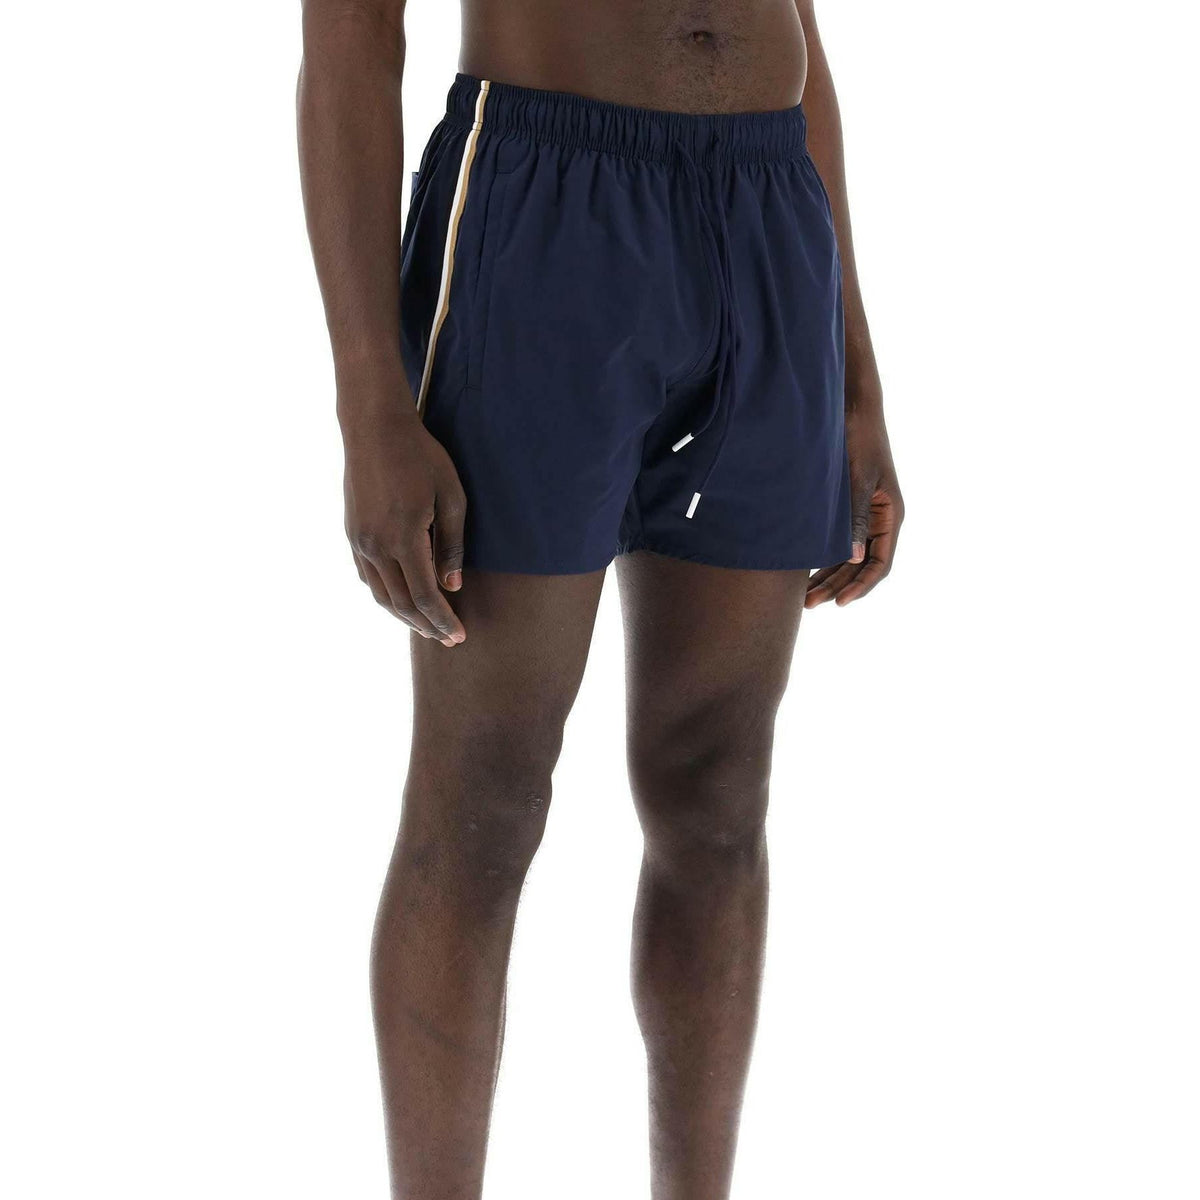 BOSS - Navy Blue Technical Fabric Swim Trunks With Tricolor Side Bands - JOHN JULIA